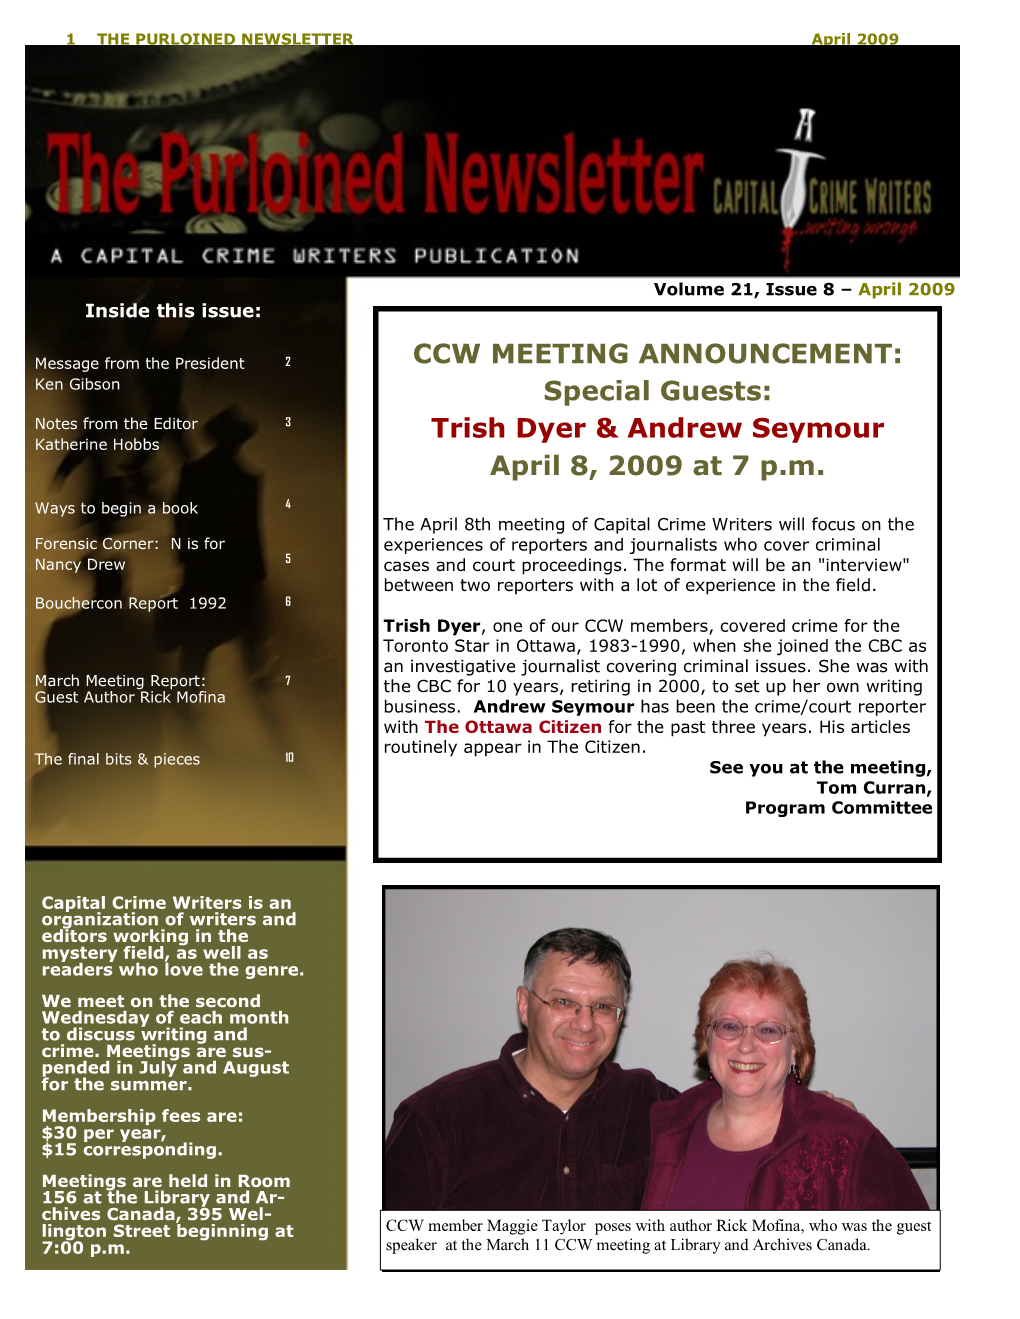 CCW MEETING ANNOUNCEMENT: Special